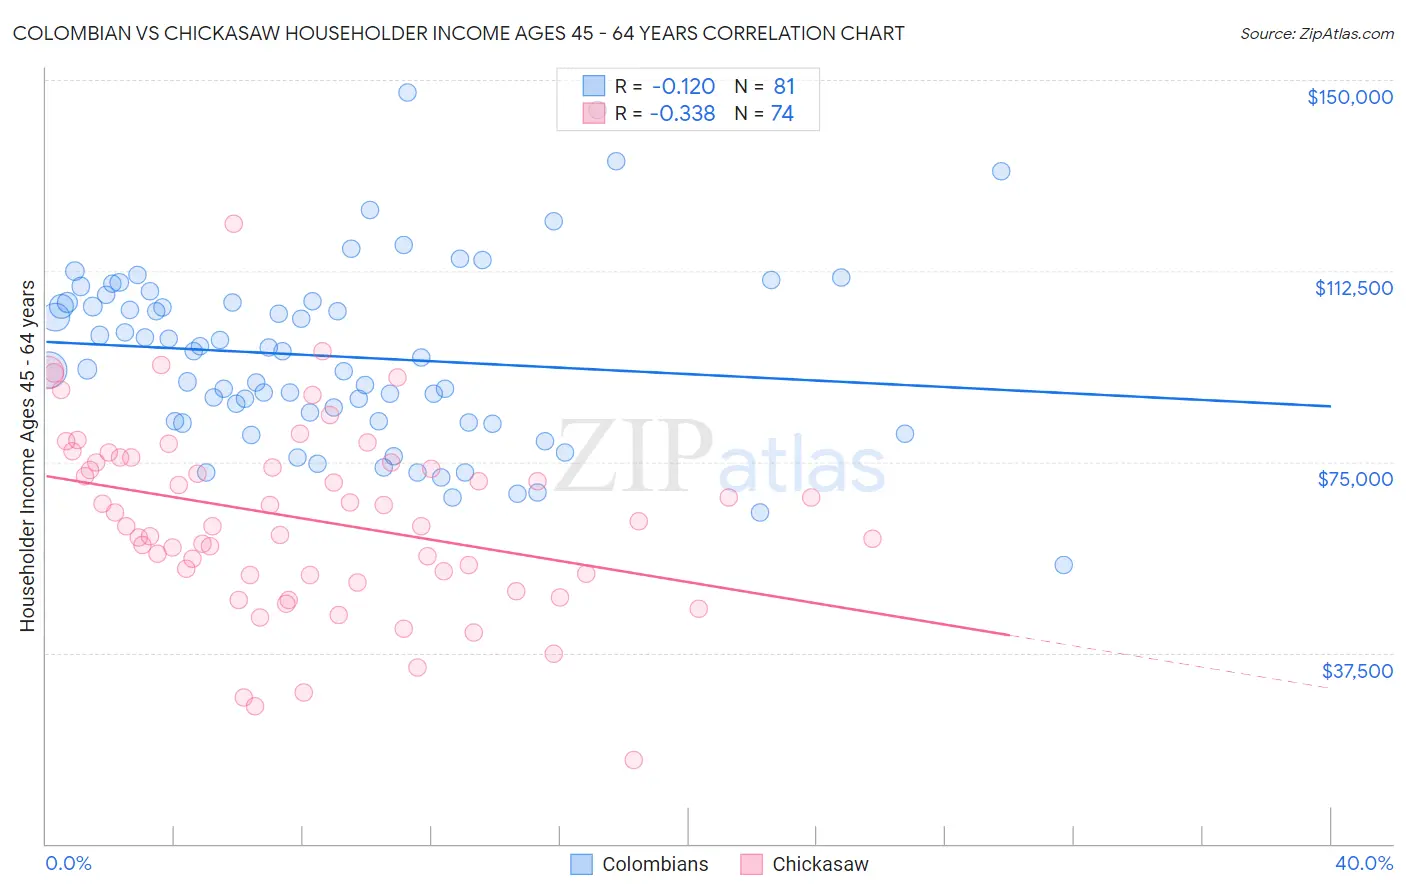 Colombian vs Chickasaw Householder Income Ages 45 - 64 years